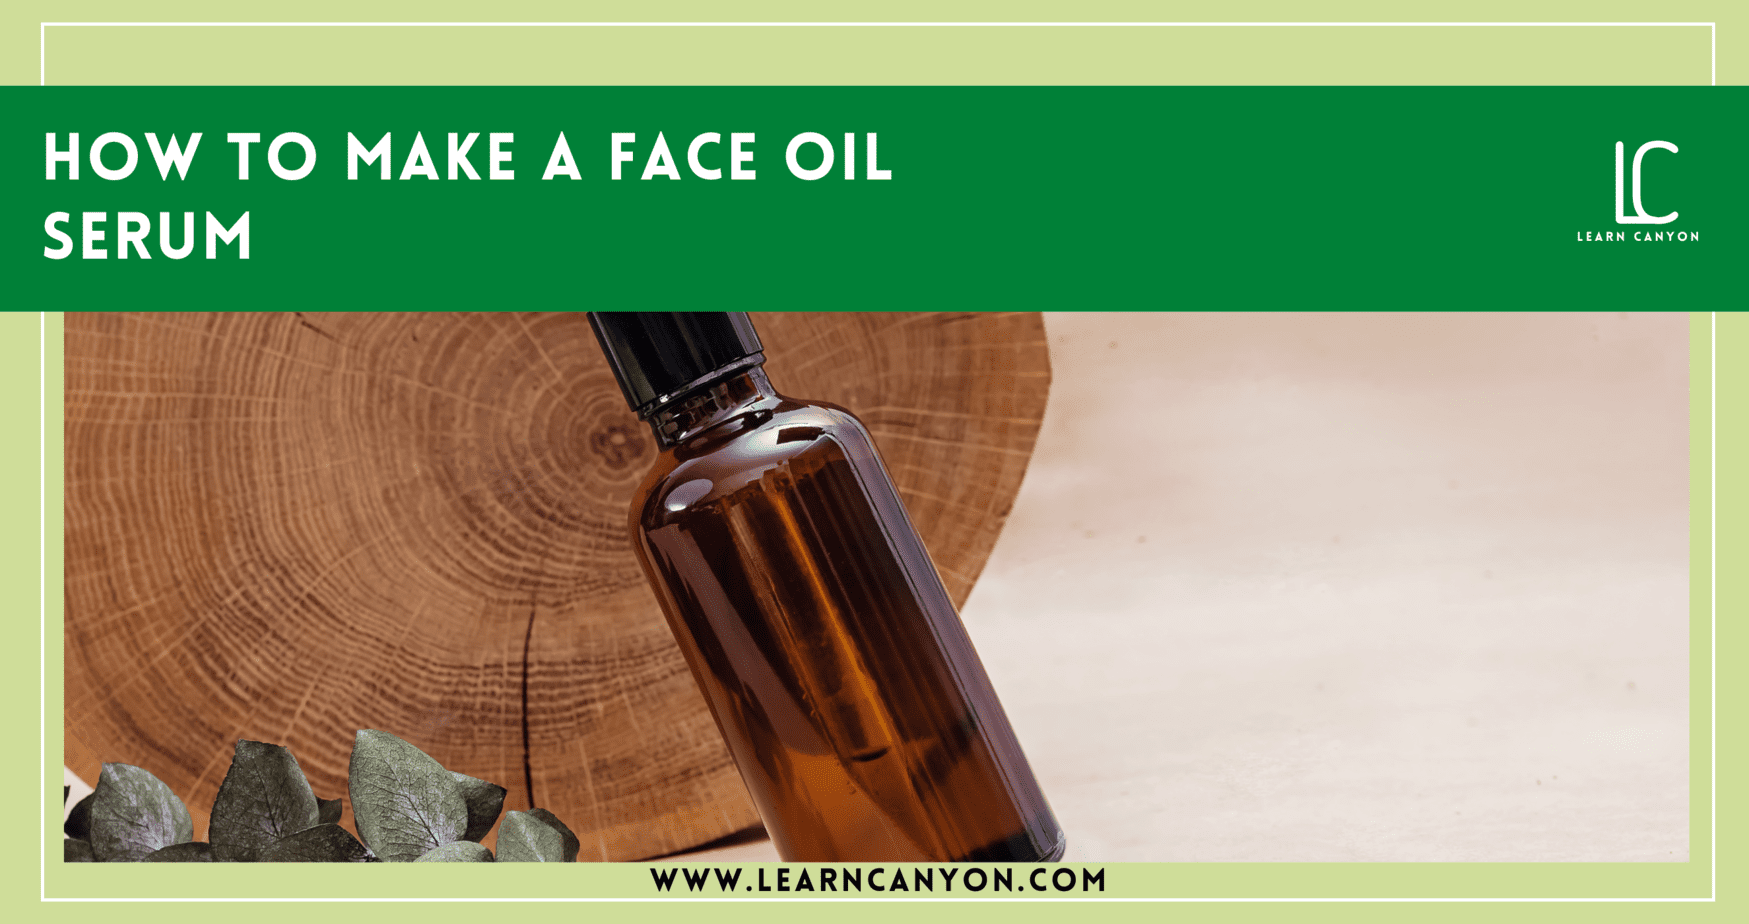 Oil's well that ends well: layering with perfume oils - The Perfume Society